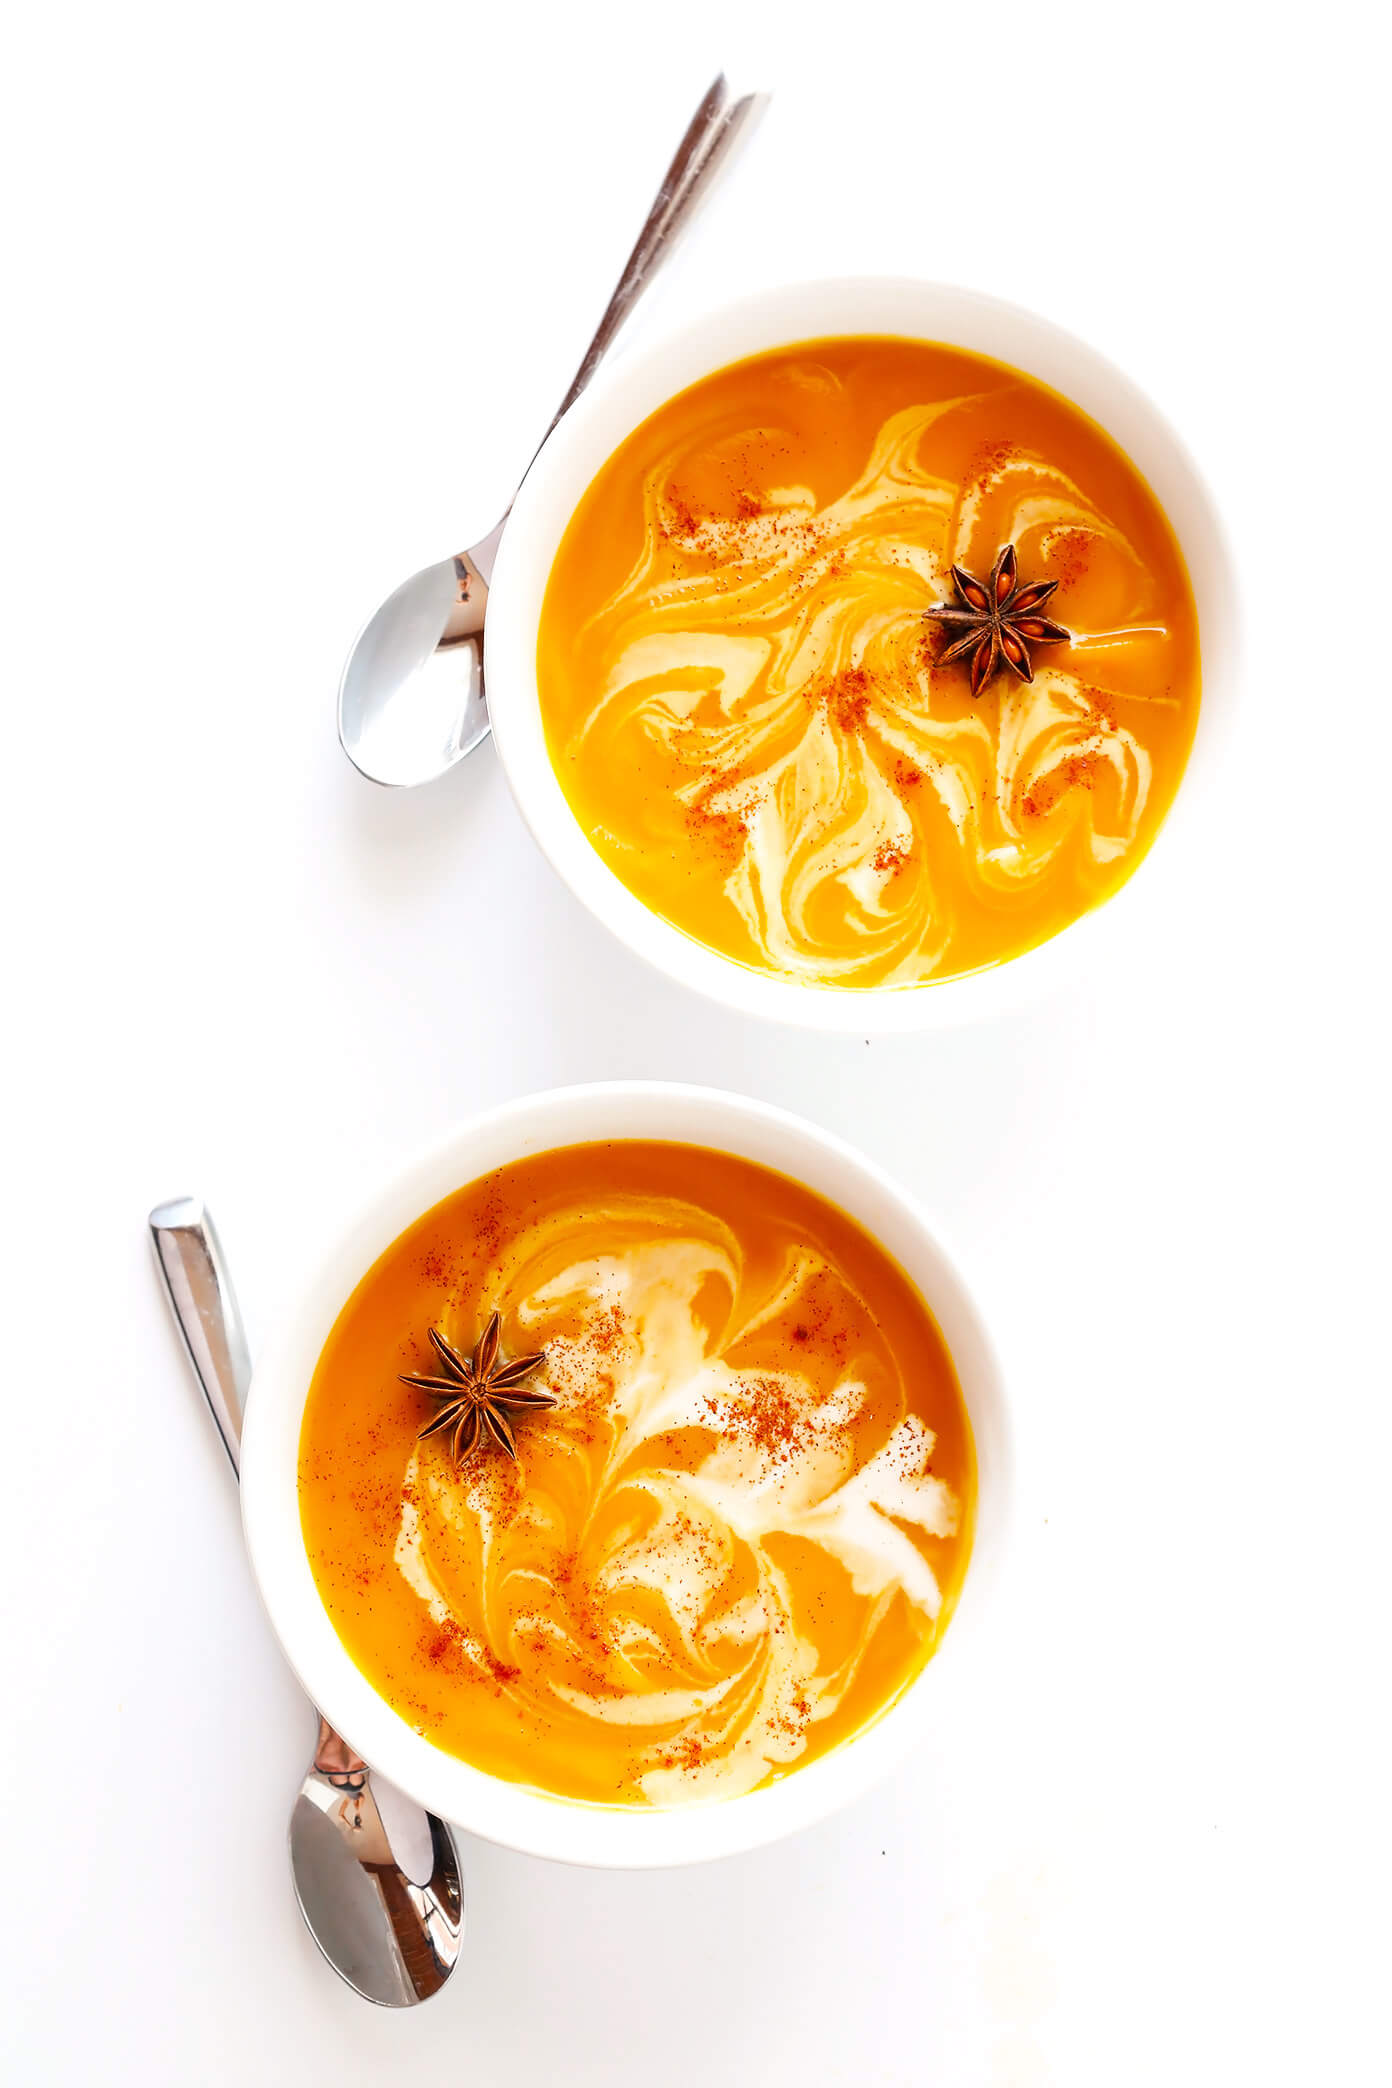 So obsessed with this Chai Butternut Squash Soup recipe! It's naturally gluten-free and vegan, it's easy to make in the slow cooker or Instant Pot, and it's so cozy and delicious.